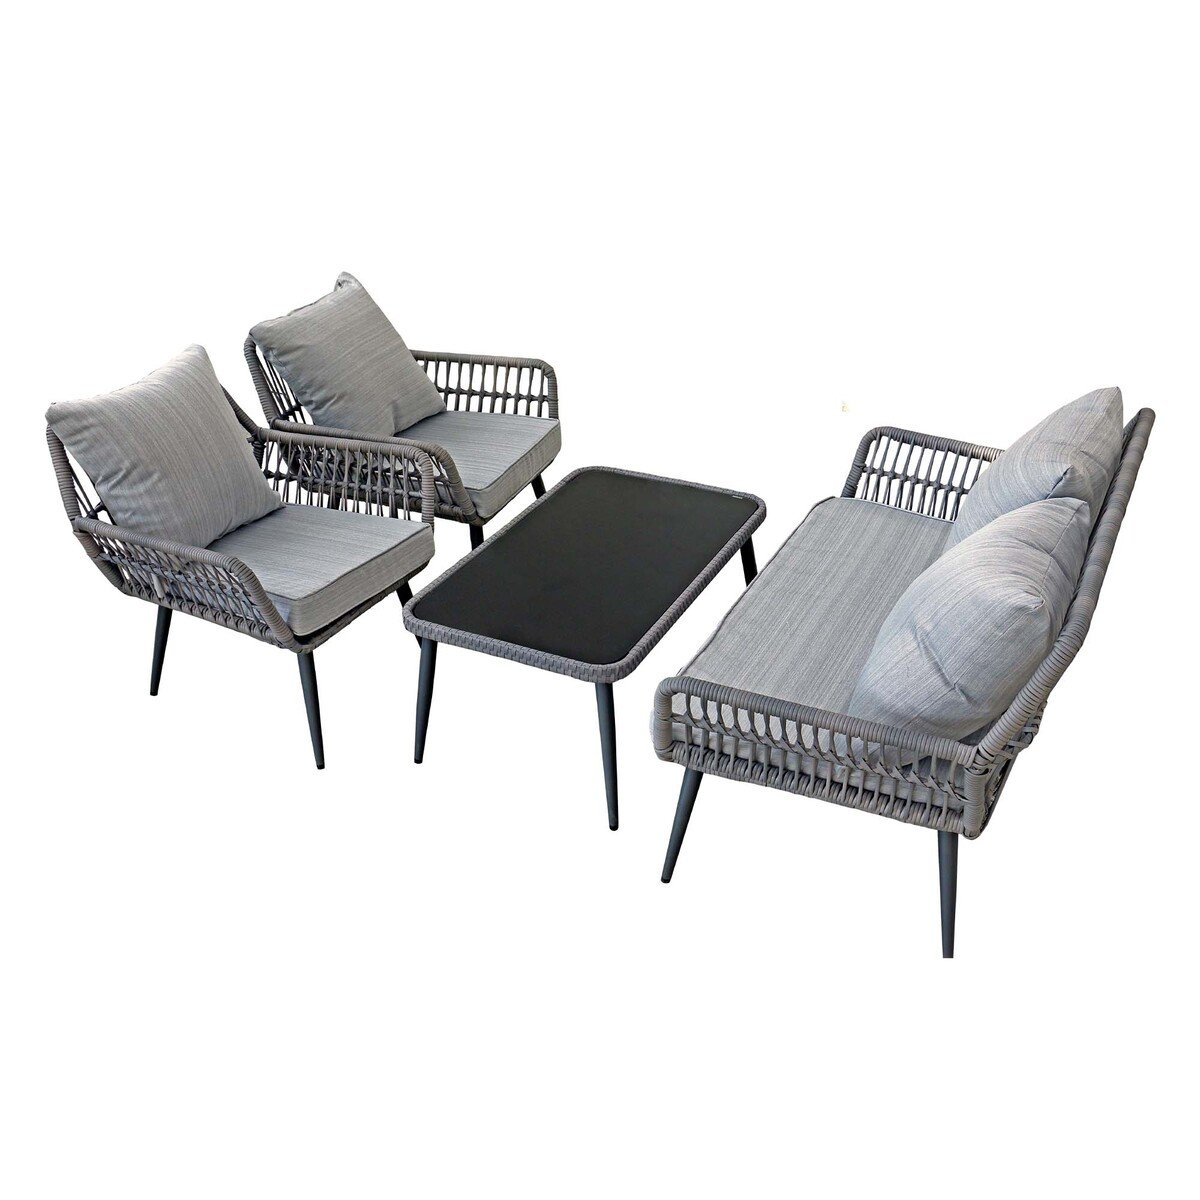 Campmate Lounger Set 4pcs (2 Seater + 2 Chair + Table) CM-210576